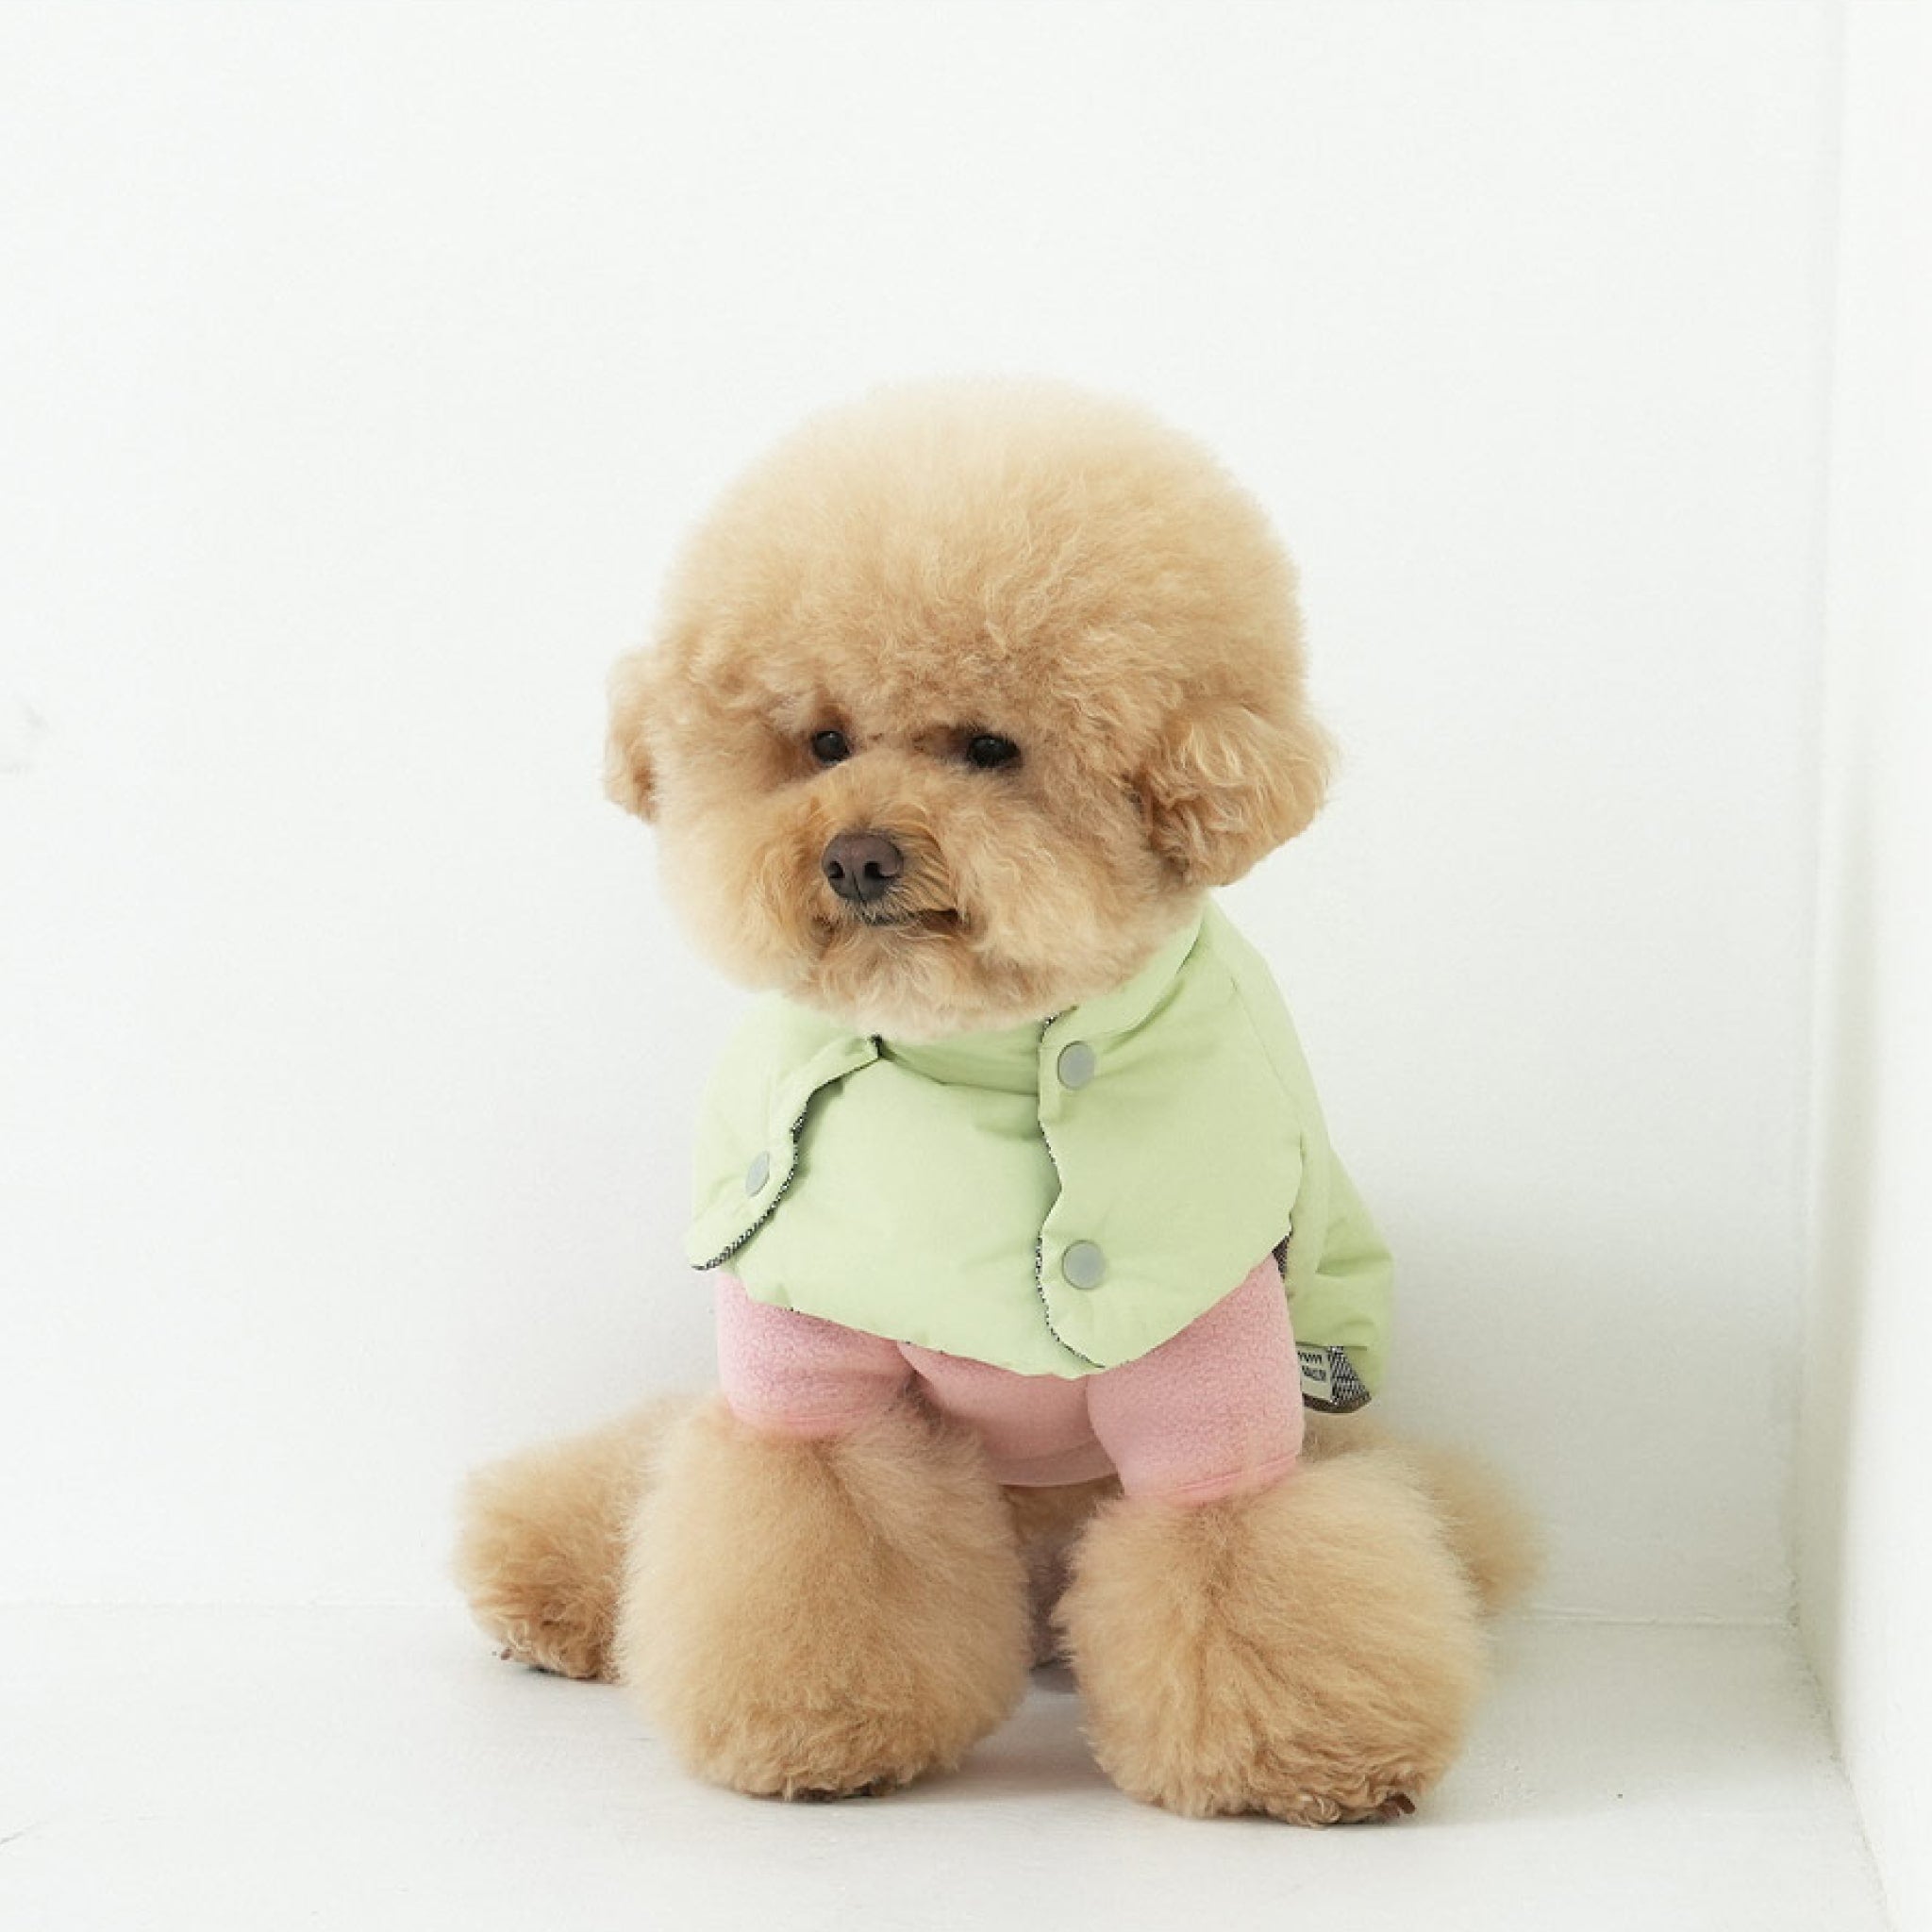 Dog wearing the fleece neck warmer padded jacket set in green and pink